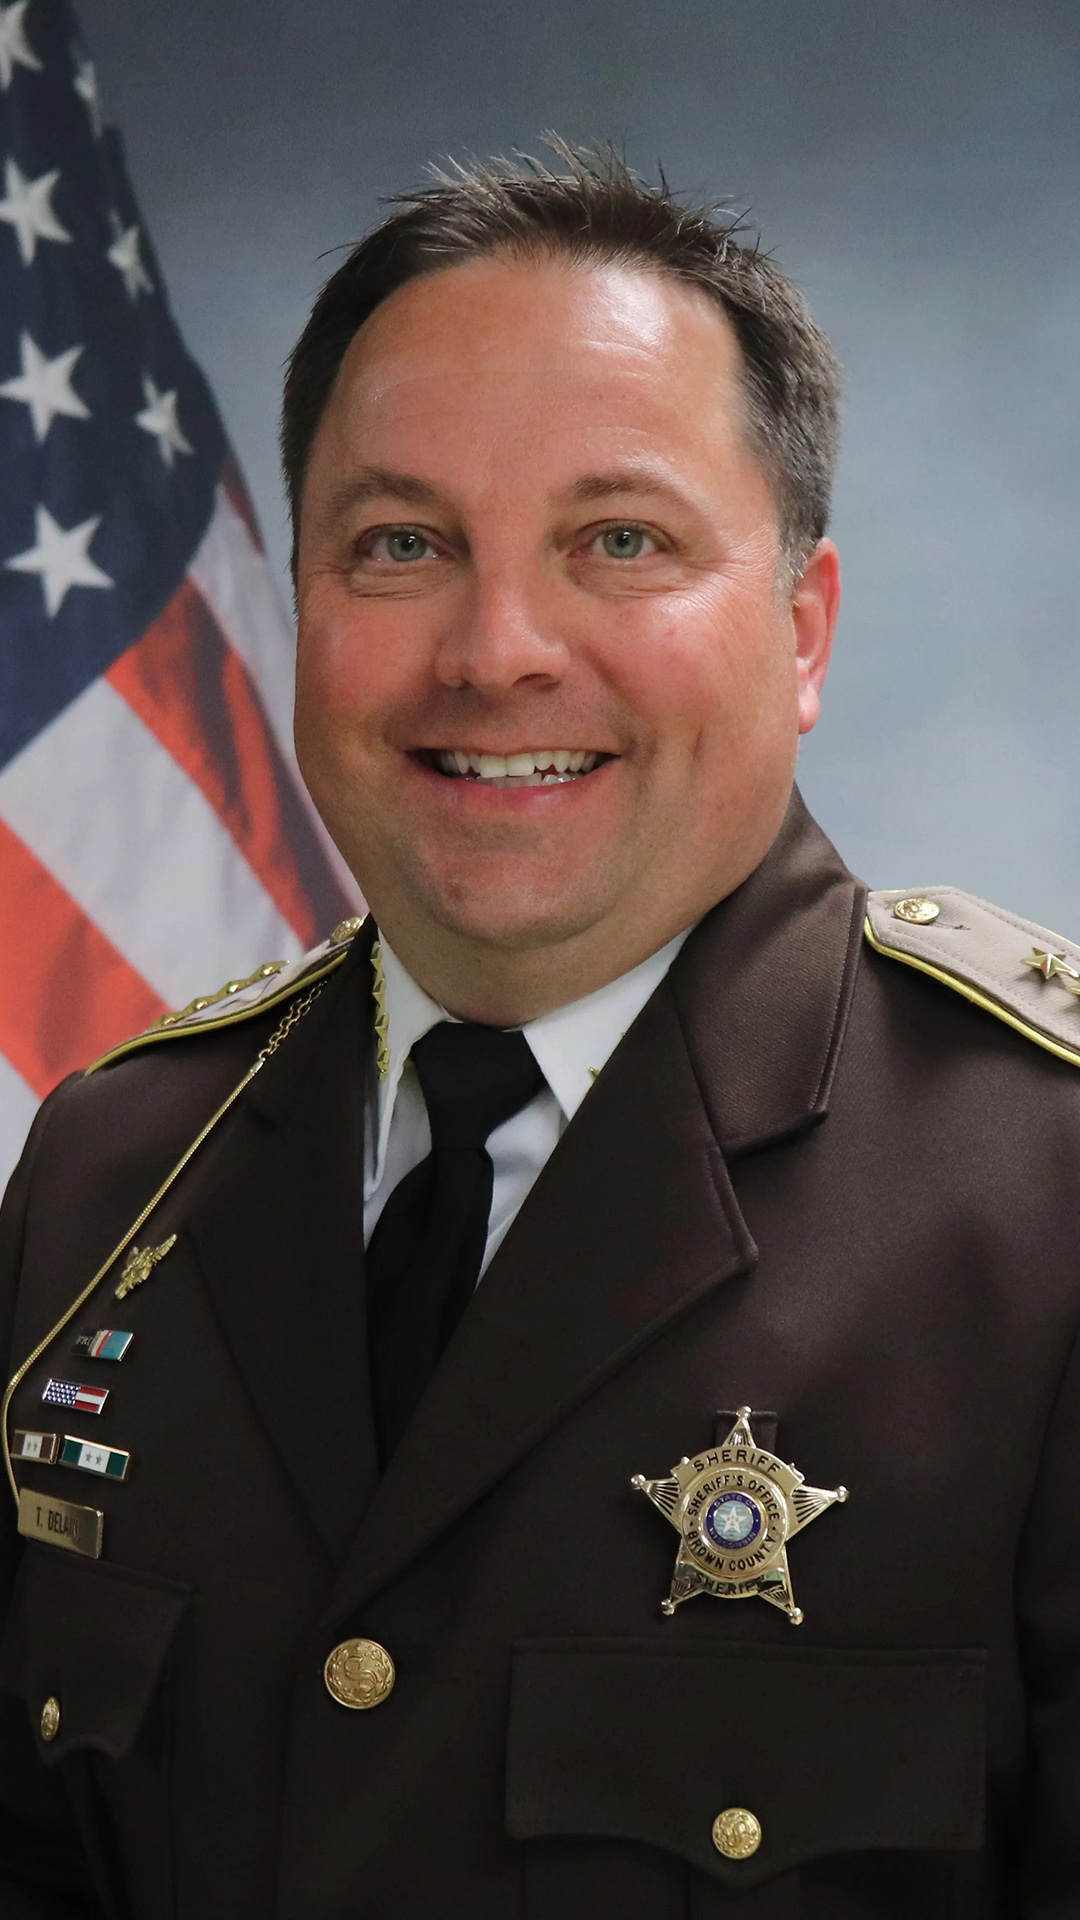 Todd Delain poses for a portrait while wearing a sheriff's uniform and with a U.S. flag on a graphic in the background.